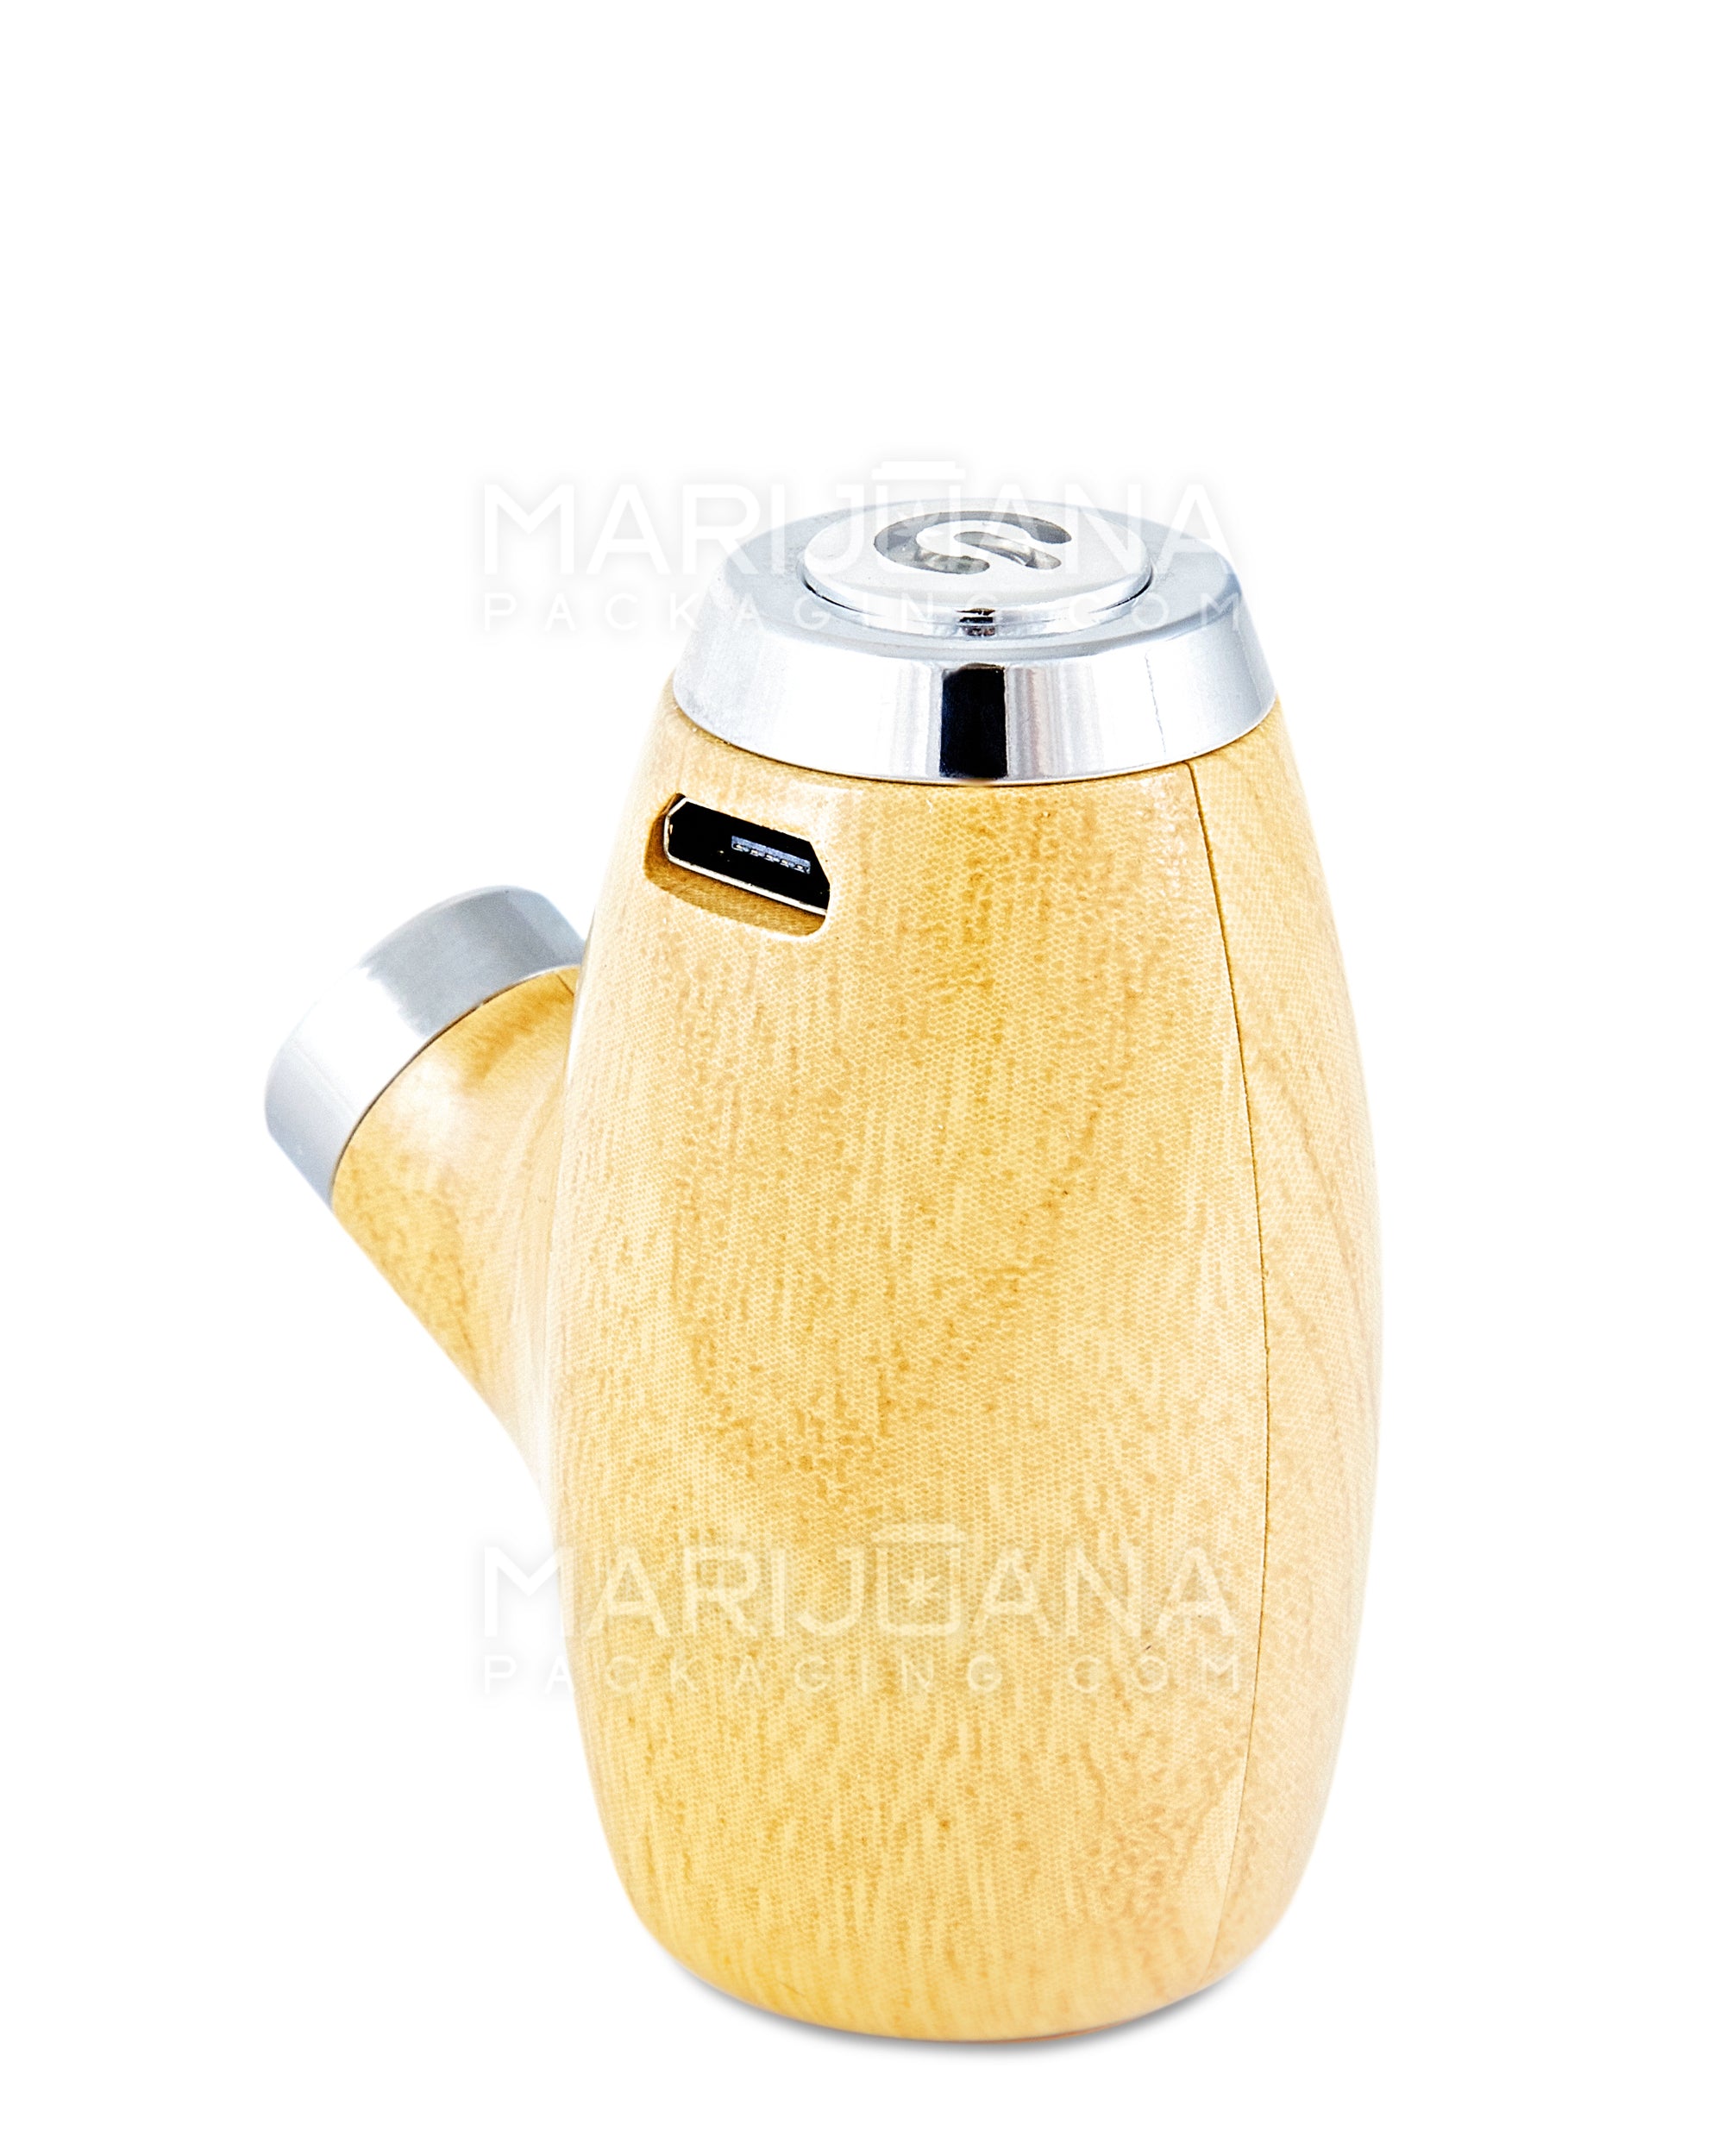 Variable Voltage "Old Man's Pipe" Shaped Vape Cartridge Battery | 900mah - Spruce Wood - 510 Thread - 6